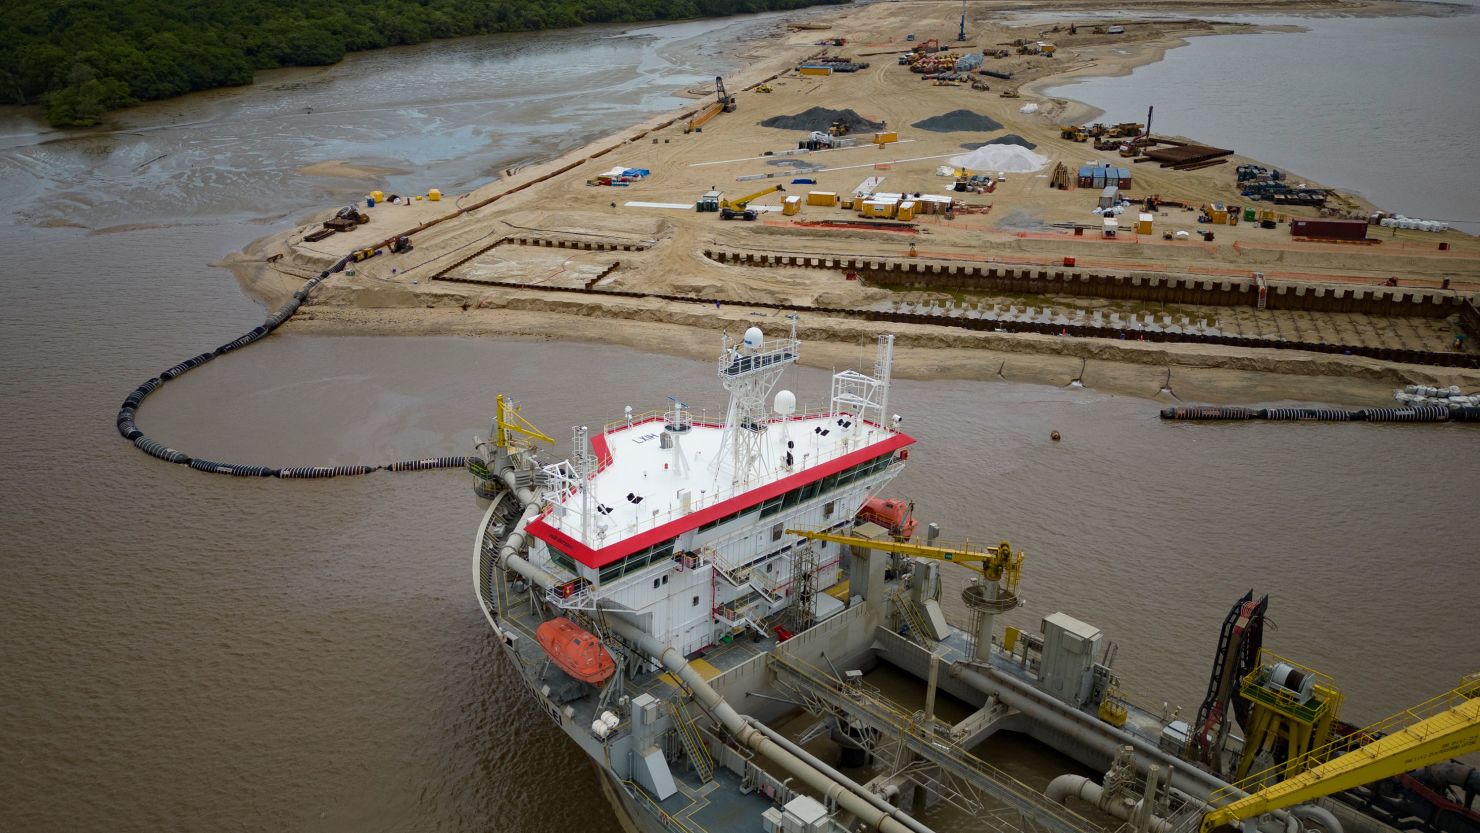 A ship creates an artificial island by extracting offshore sand to create a coastal port for offshore oil production at the mouth of the Demerara River in Georgetown, Guyana, Tuesday, April 11, 2023. Guyana is poised to become the world's fourth-largest offshore oil producer, placing it ahead of Qatar, the United States, Mexico and Norway. (AP Photo/Matias Delacroix)